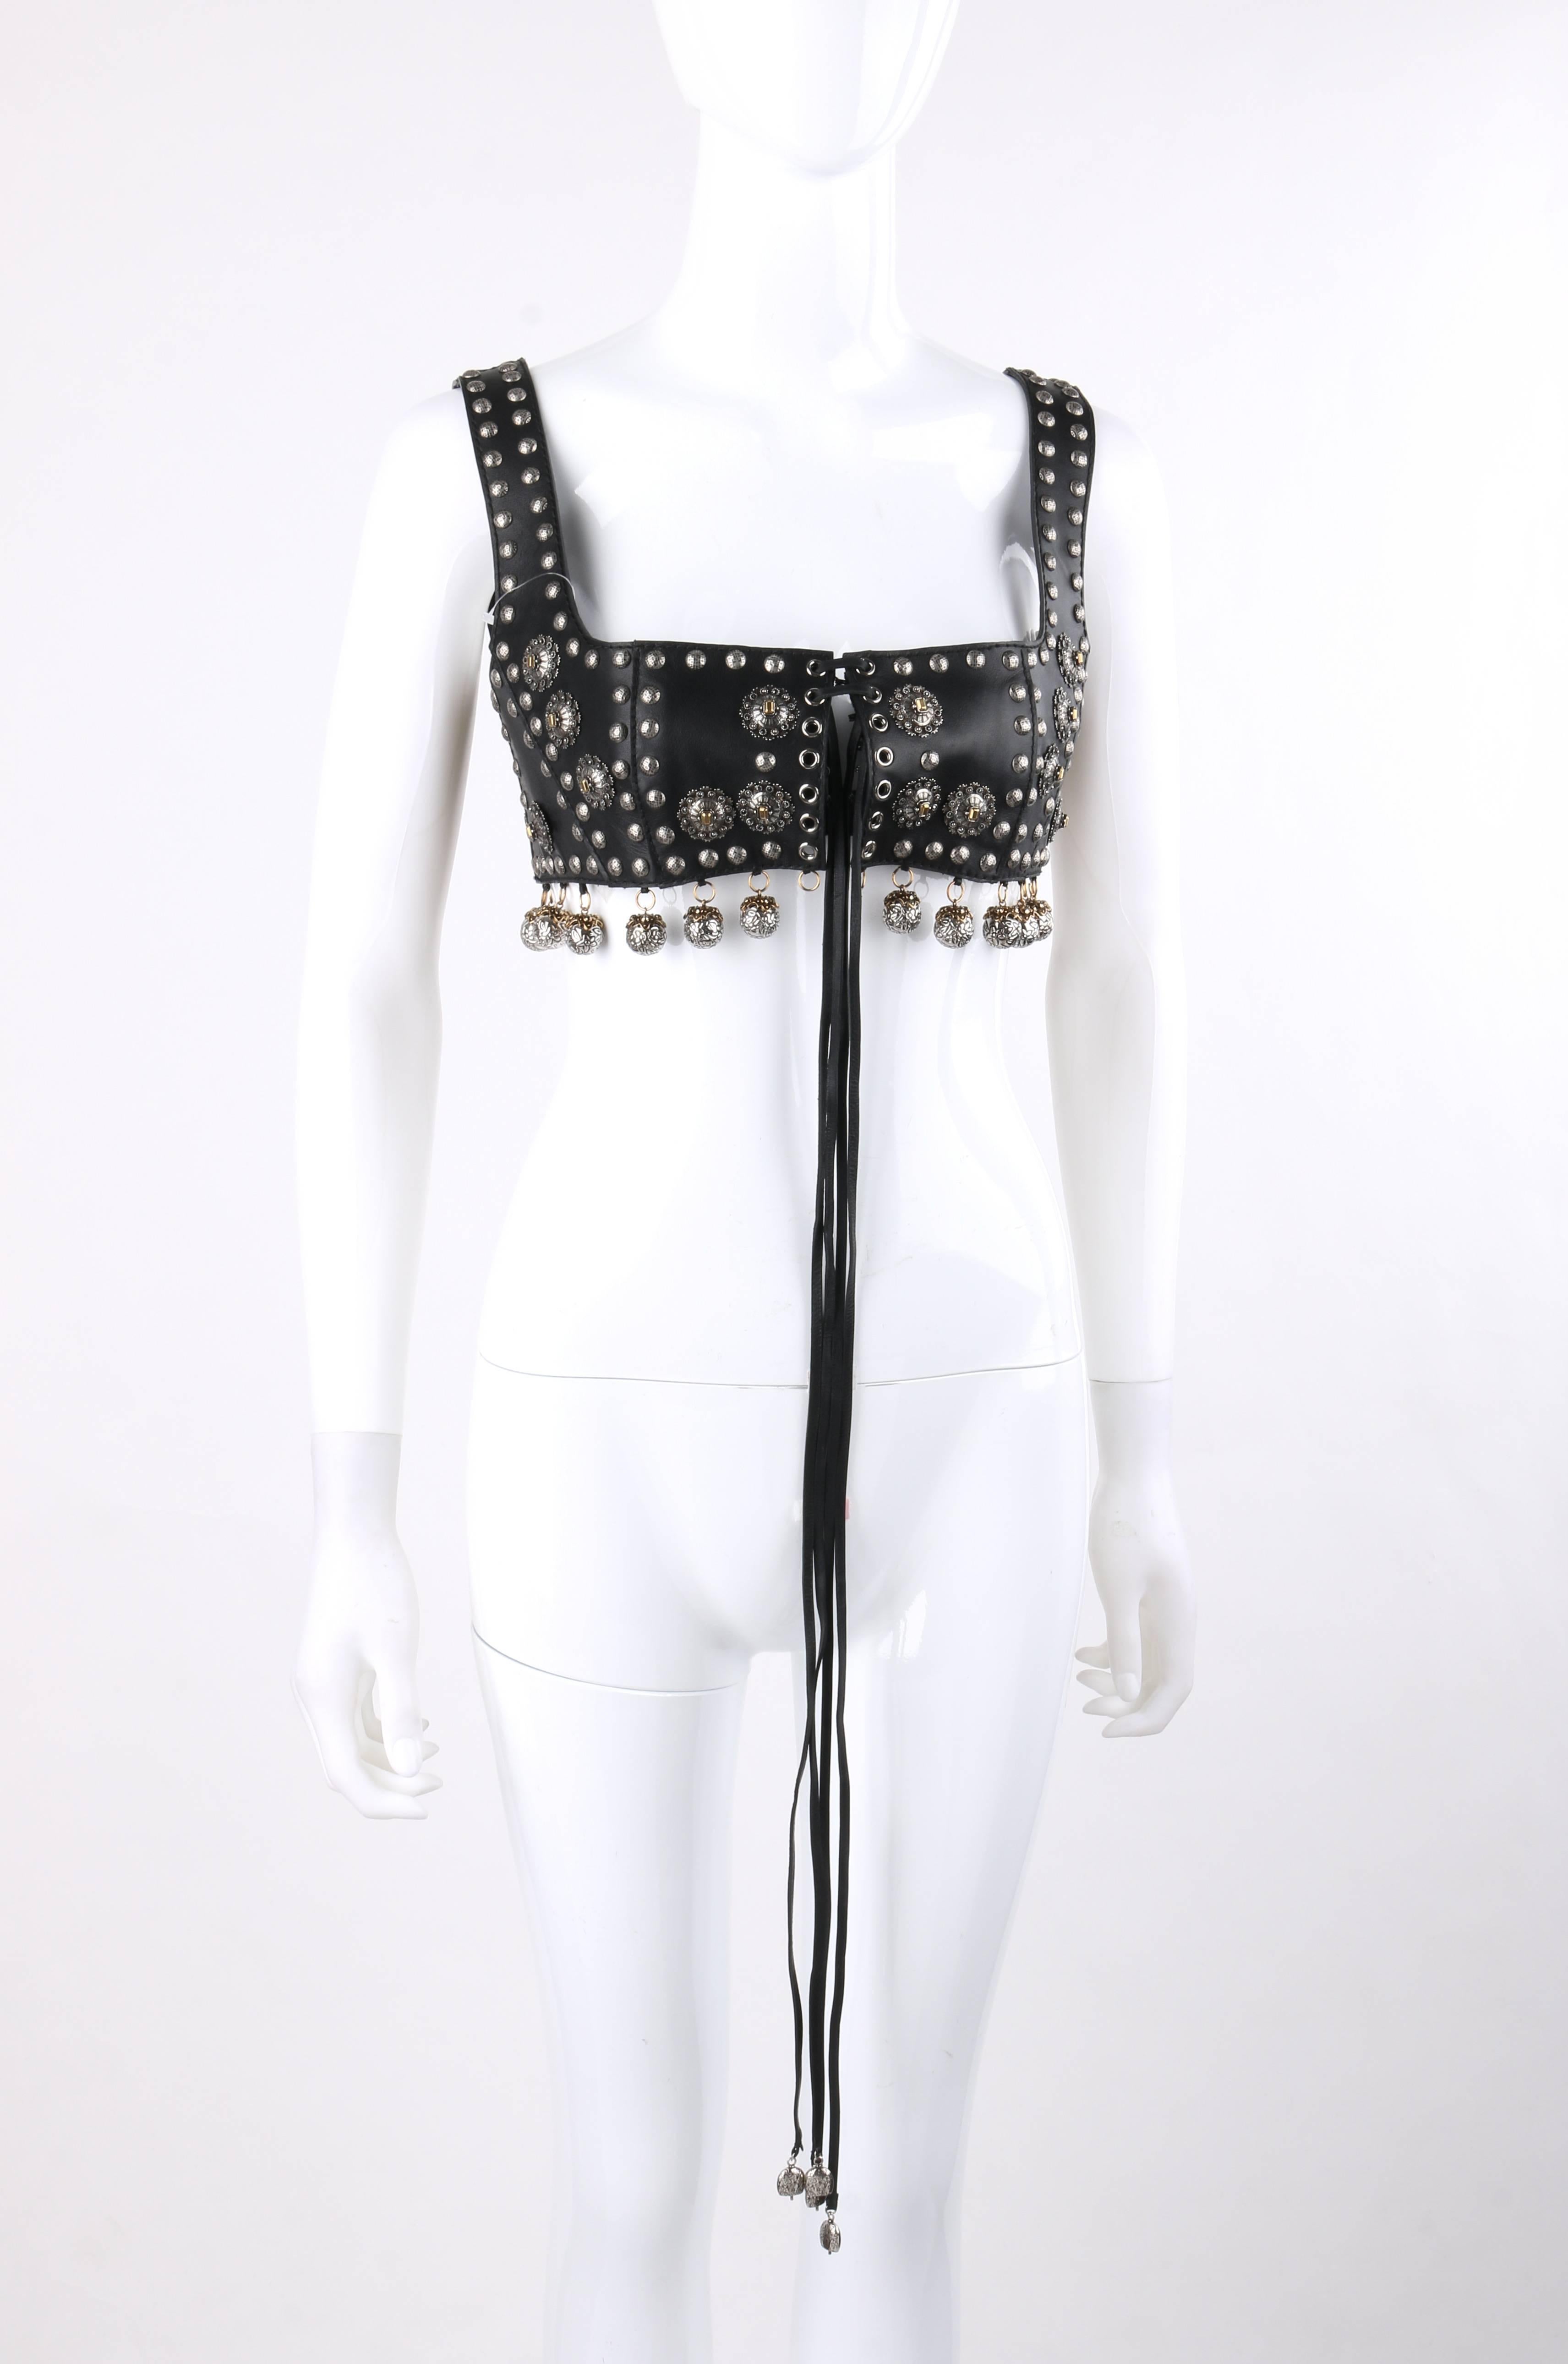 Alexander McQueen S/S 2015 black nappa leather studded lace up bra top / bustier. Runway look #17 designed by Sarah Burton. Black calfskin (nappa) leather bra top. Square neckline. Sleeveless. Princess seams. Center front lace up detail. Two thin